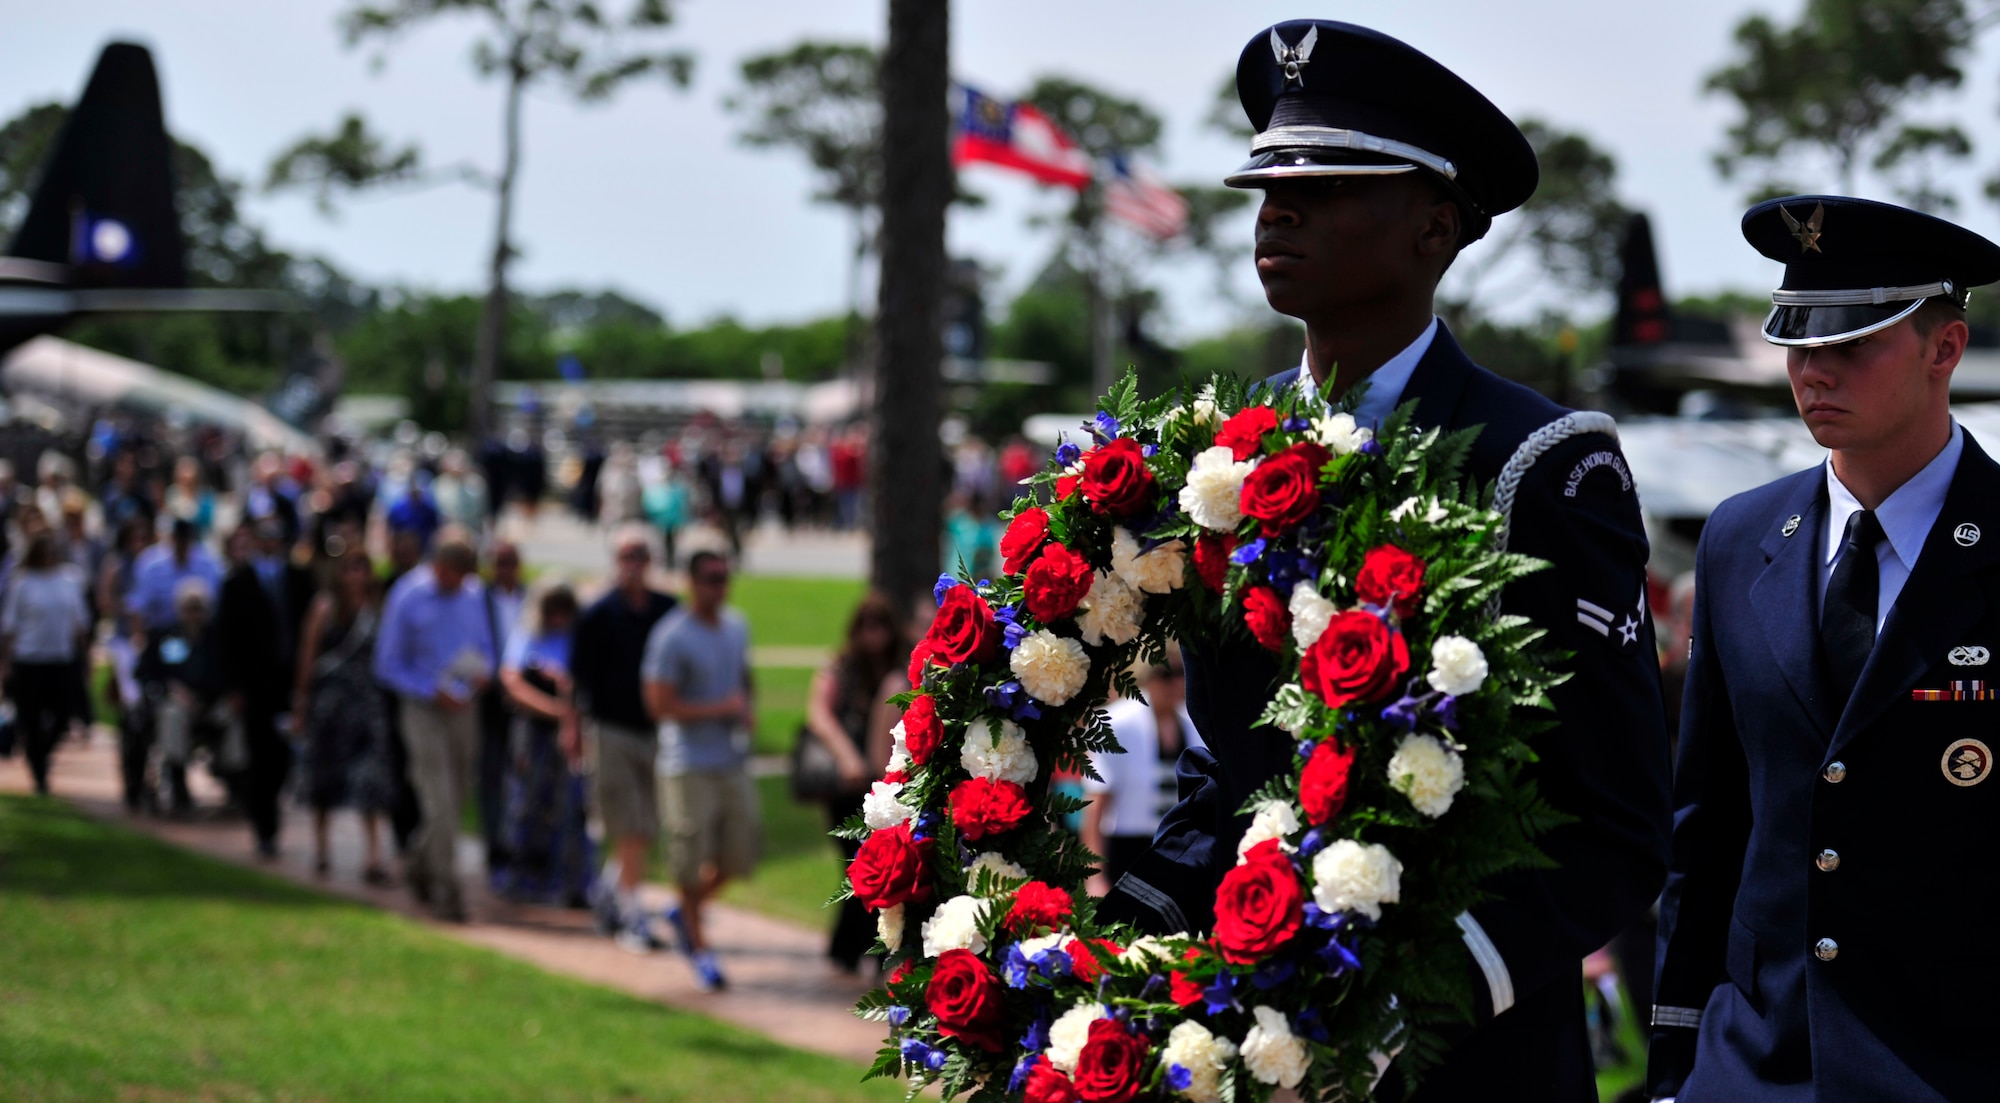 An honor guardsman carries a rose wreath from the air park to the base chapel during the Operation Eagle Claw memorial ceremony on Hurlburt Field, Fla., April 24, 2015.  The rose wreath honored Maj. Richard Bakke, Maj. Harold Lewis Jr., Tech. Sgt. Joel C. Mayo, Maj. Lyn McIntosh and Capt. Charles McMillan II, all from the 8th Special Operations Squadron, as well as Marine Sgt. John Harvey, Cpl. George Holmes Jr. and Staff Sgt. Dewey Johnson, who lost their lives during the operation. (U.S. Air Force photo/Staff Sgt. Melanie Holochwost)